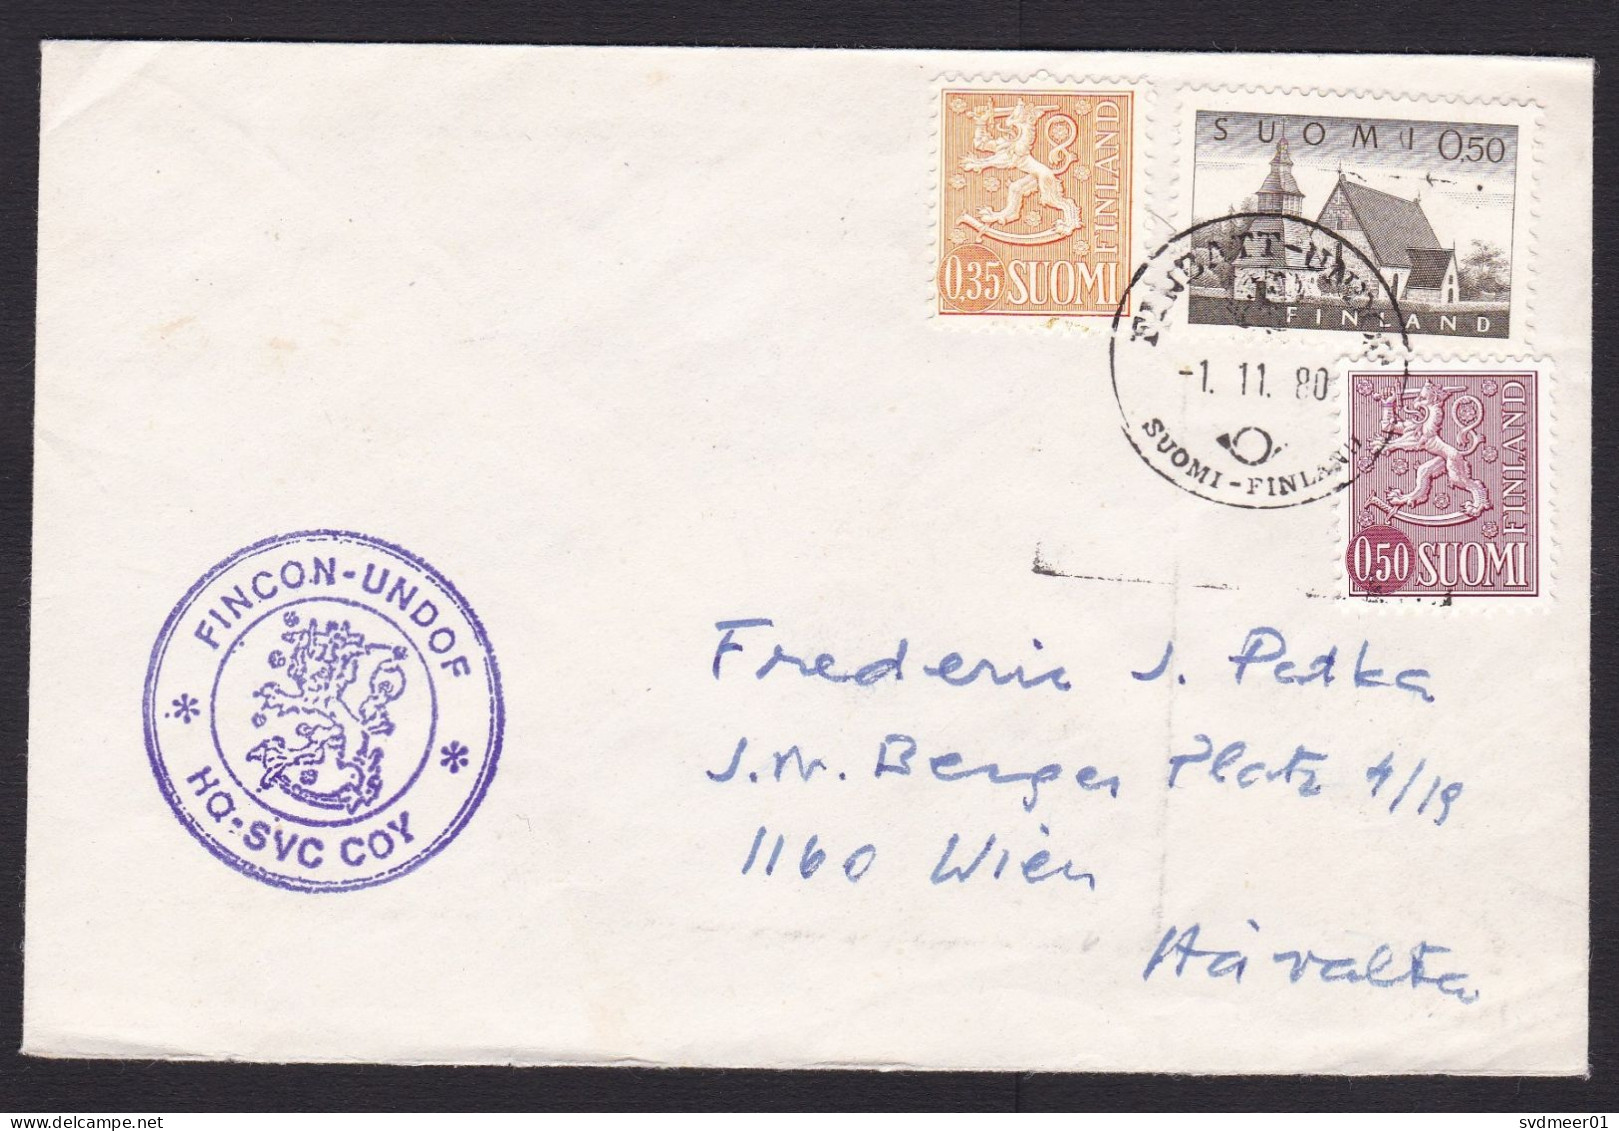 Finland: Cover To Austria, 1980, 3 Stamps, Military Cancel UNDOF, UN Forces Golan, Syria-Israel, Rare (traces Of Use) - Briefe U. Dokumente